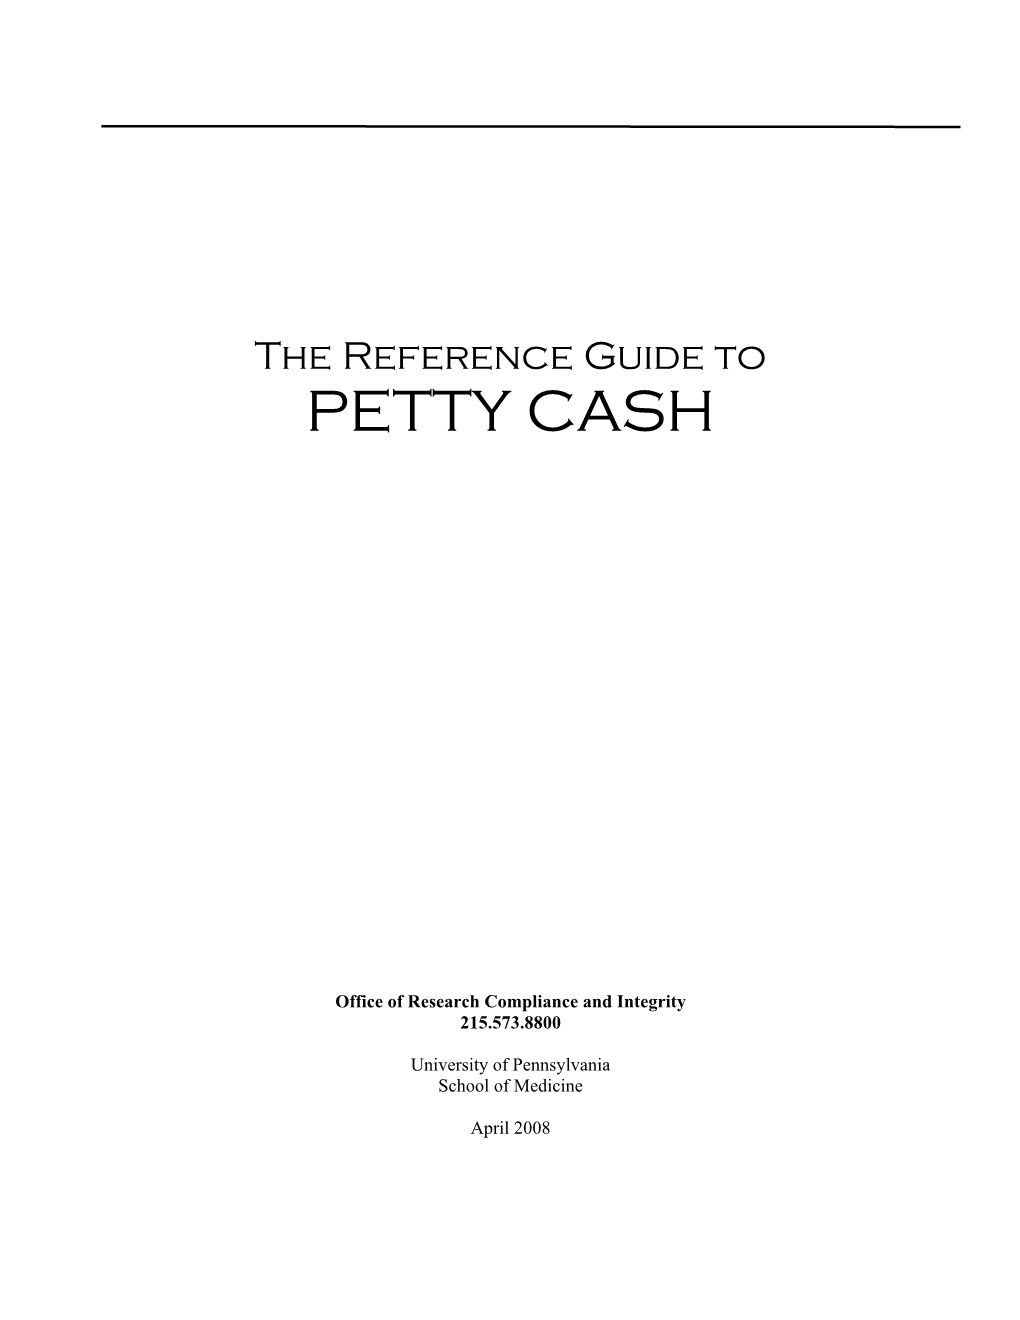 The Reference Guide to PETTY CASH